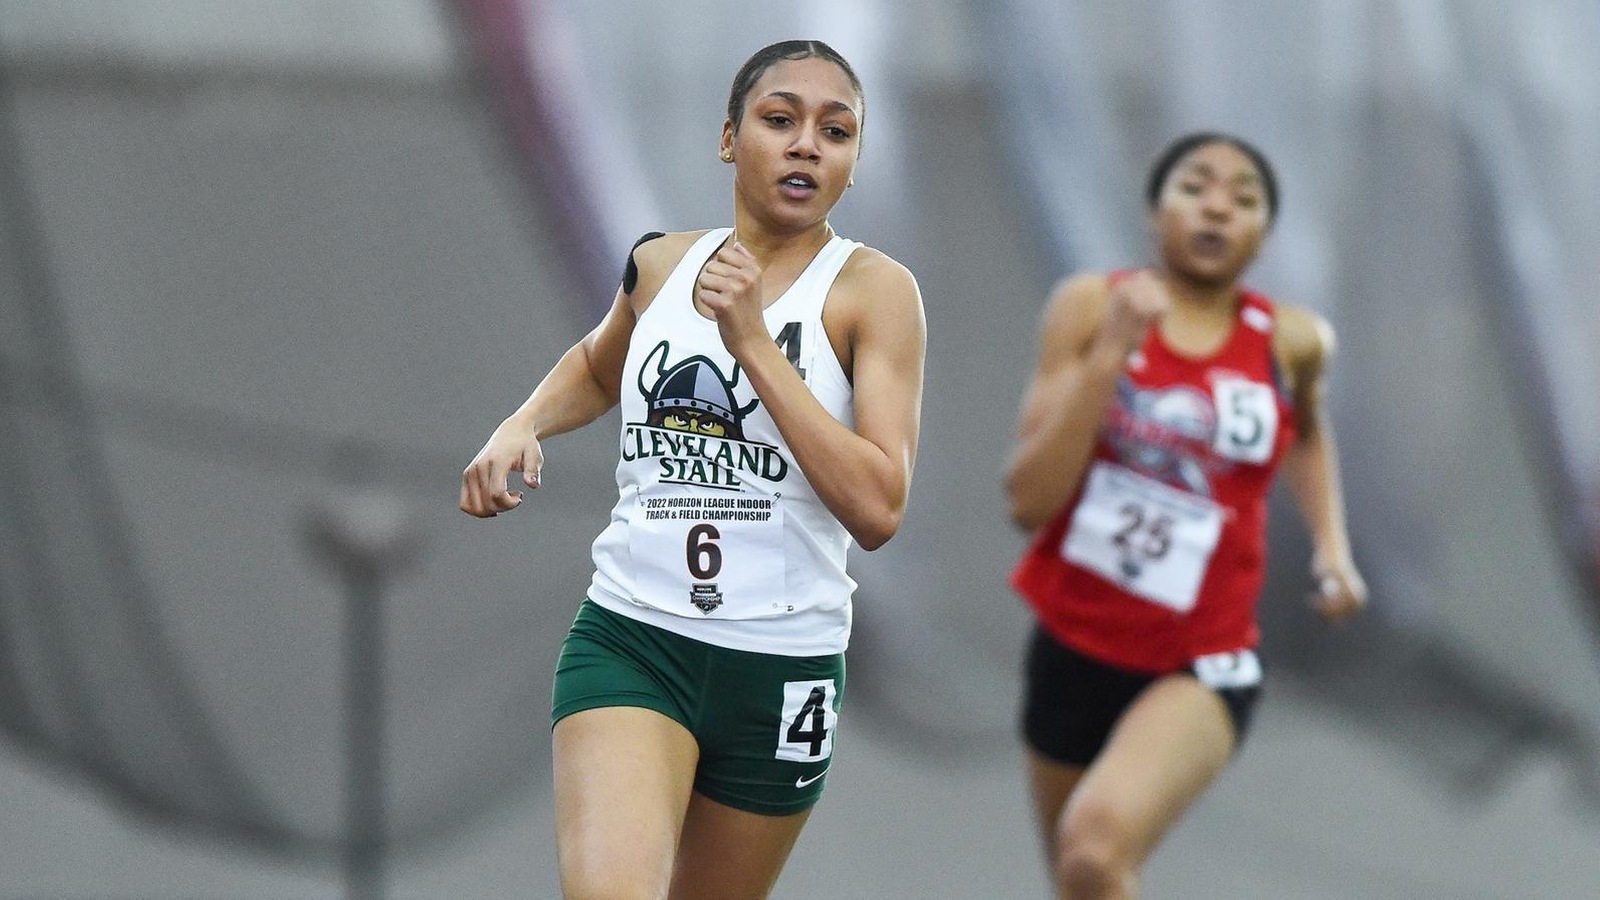 Cleveland State Track & Field Continues Outdoor Slate At Oliver Nicoloff Invite